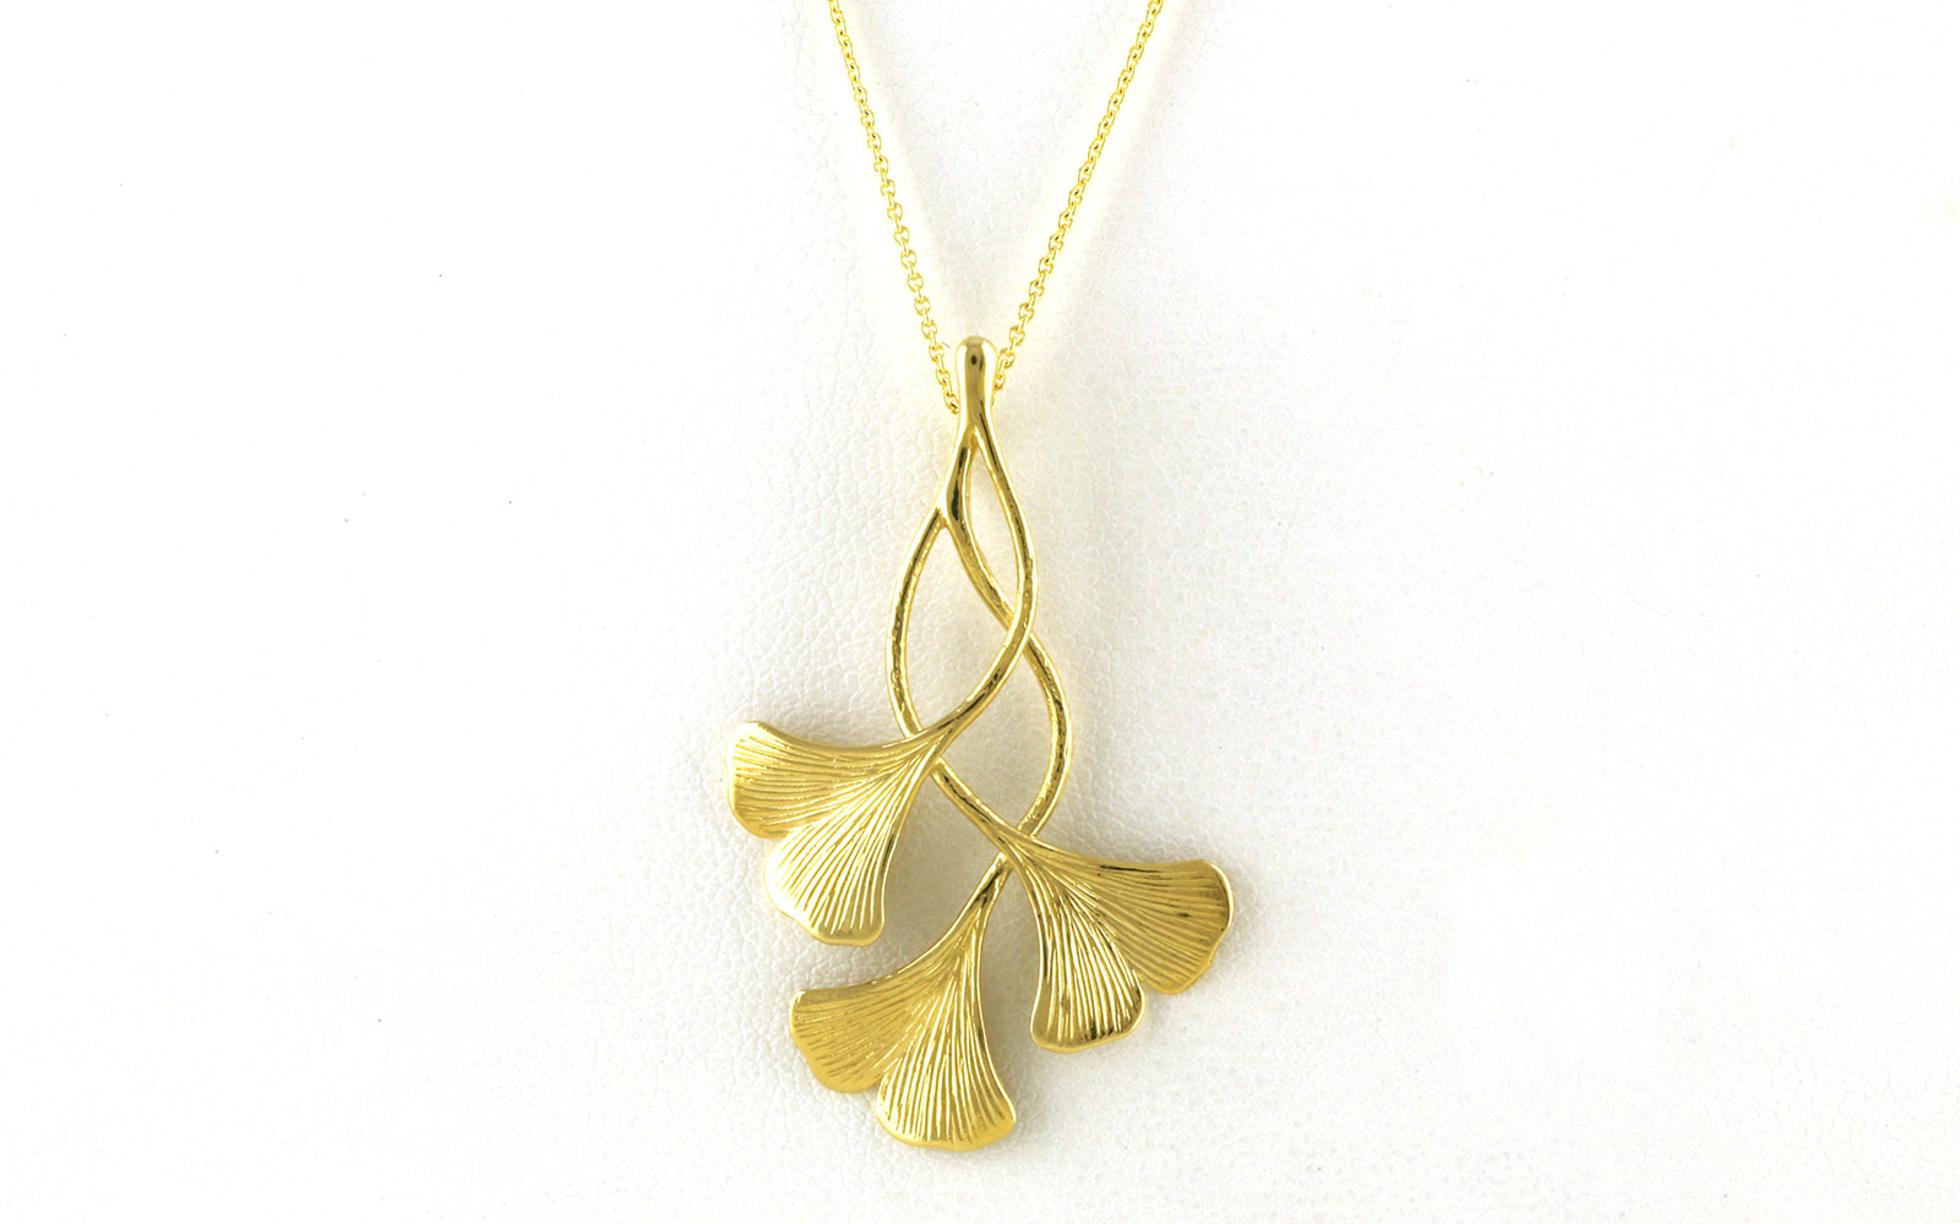 Entwined Gingko Leaf Necklace in Yellow Gold